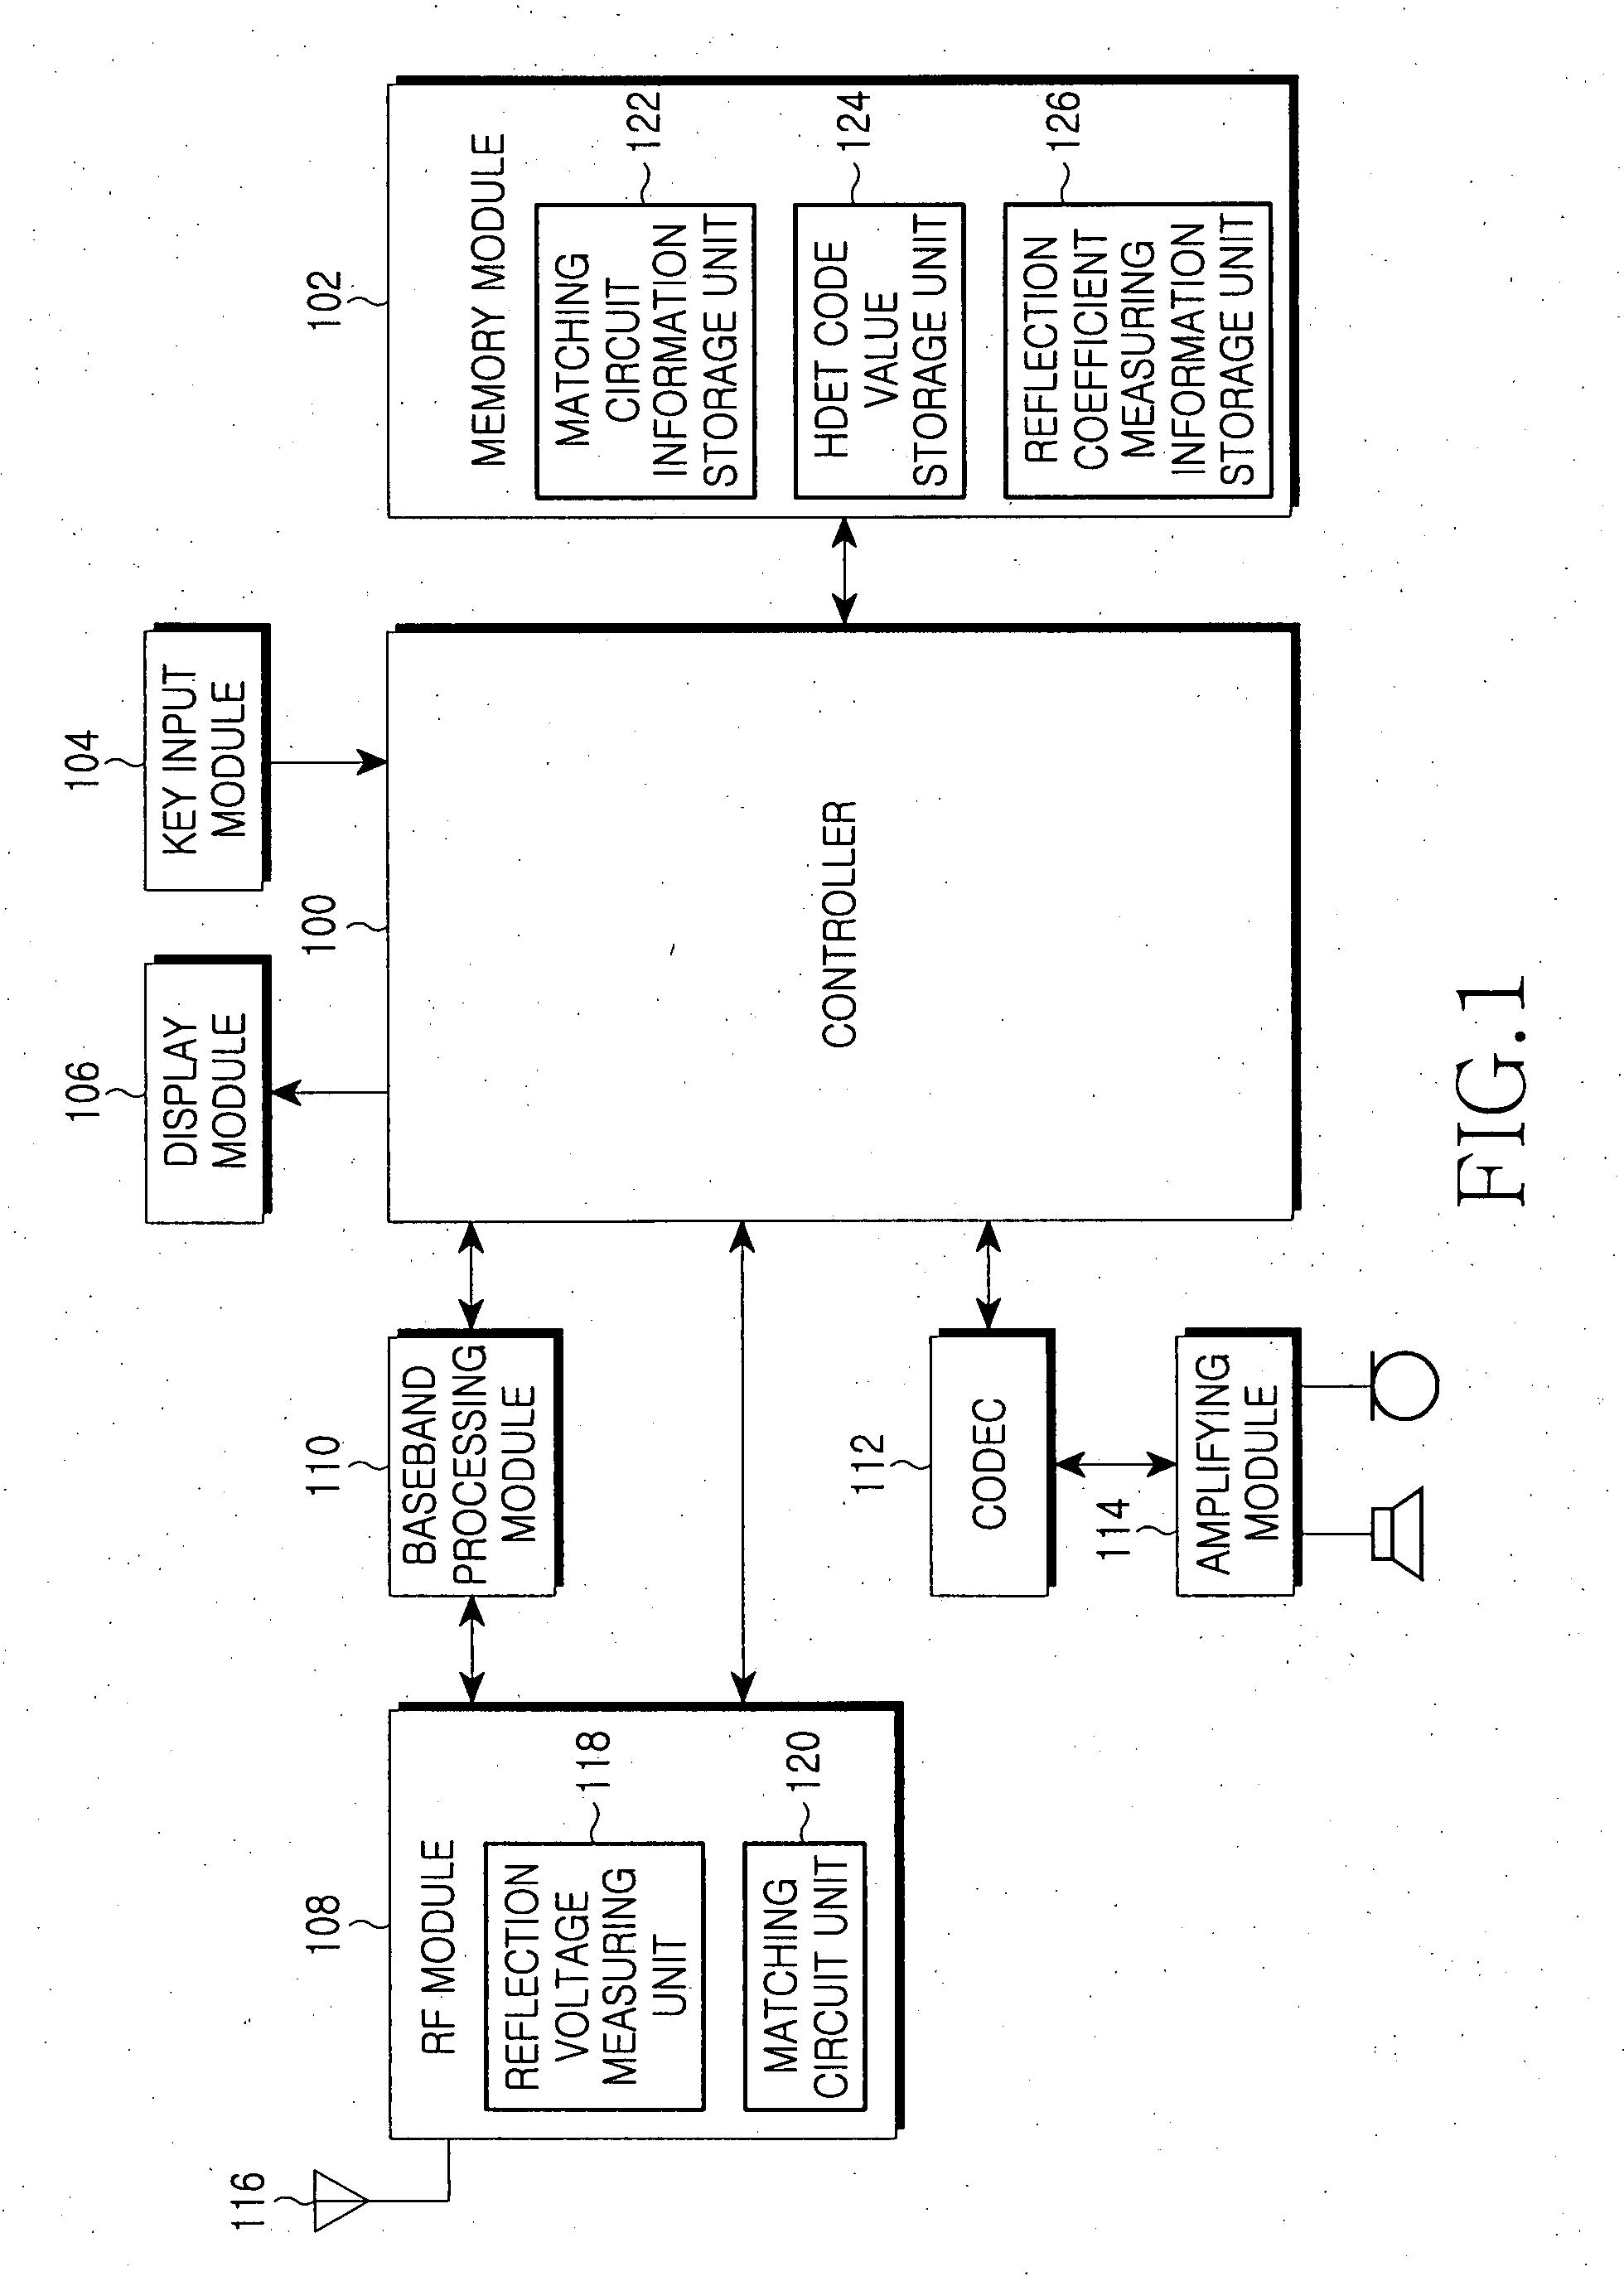 Apparatus and method for preventing degradation of RF performance due to impedance change of antenna in mobile communication terminal